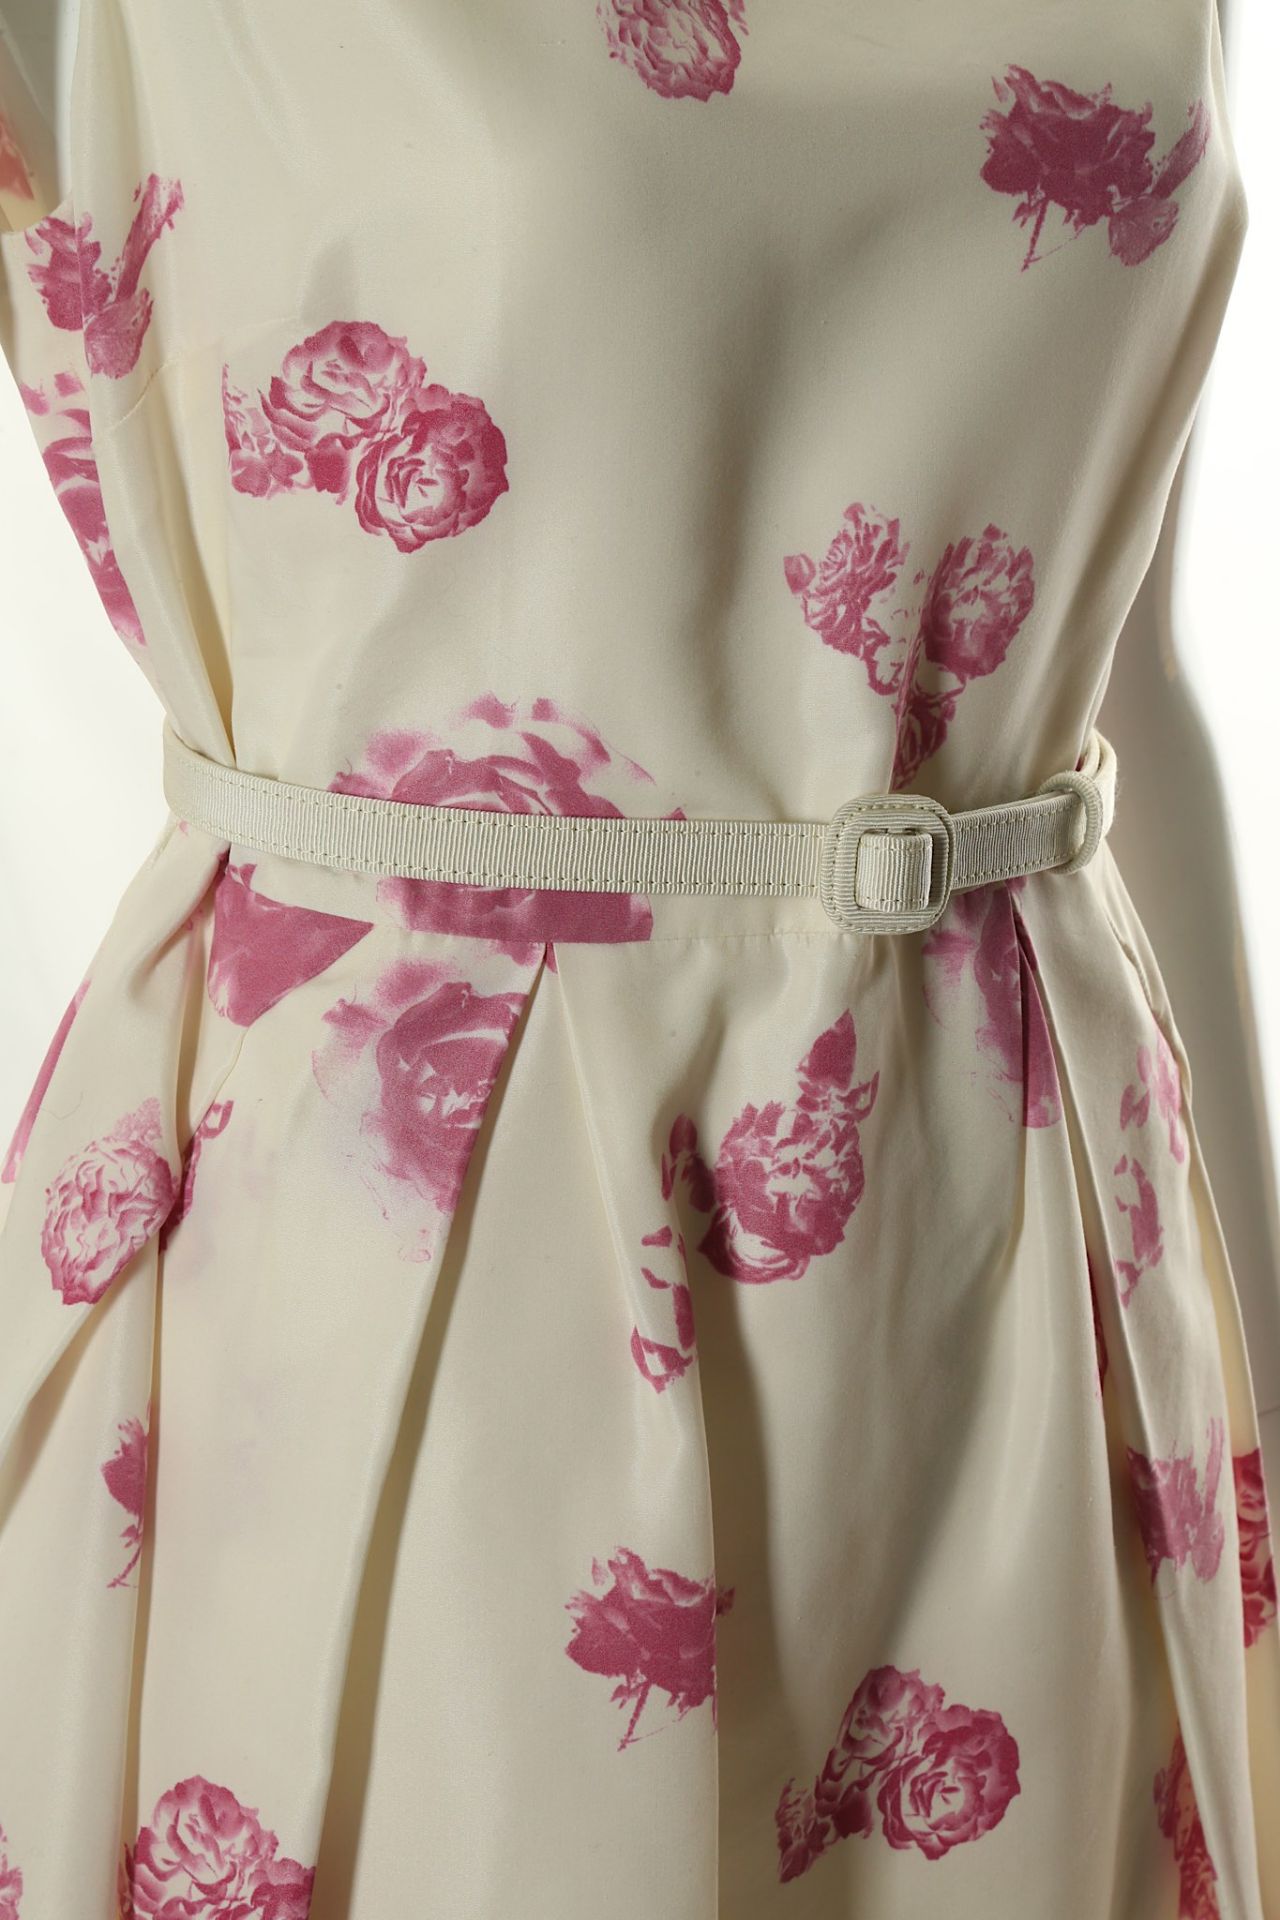 Christian Dior Rose Pattern Tulip Dress, 2000s, si - Image 2 of 5